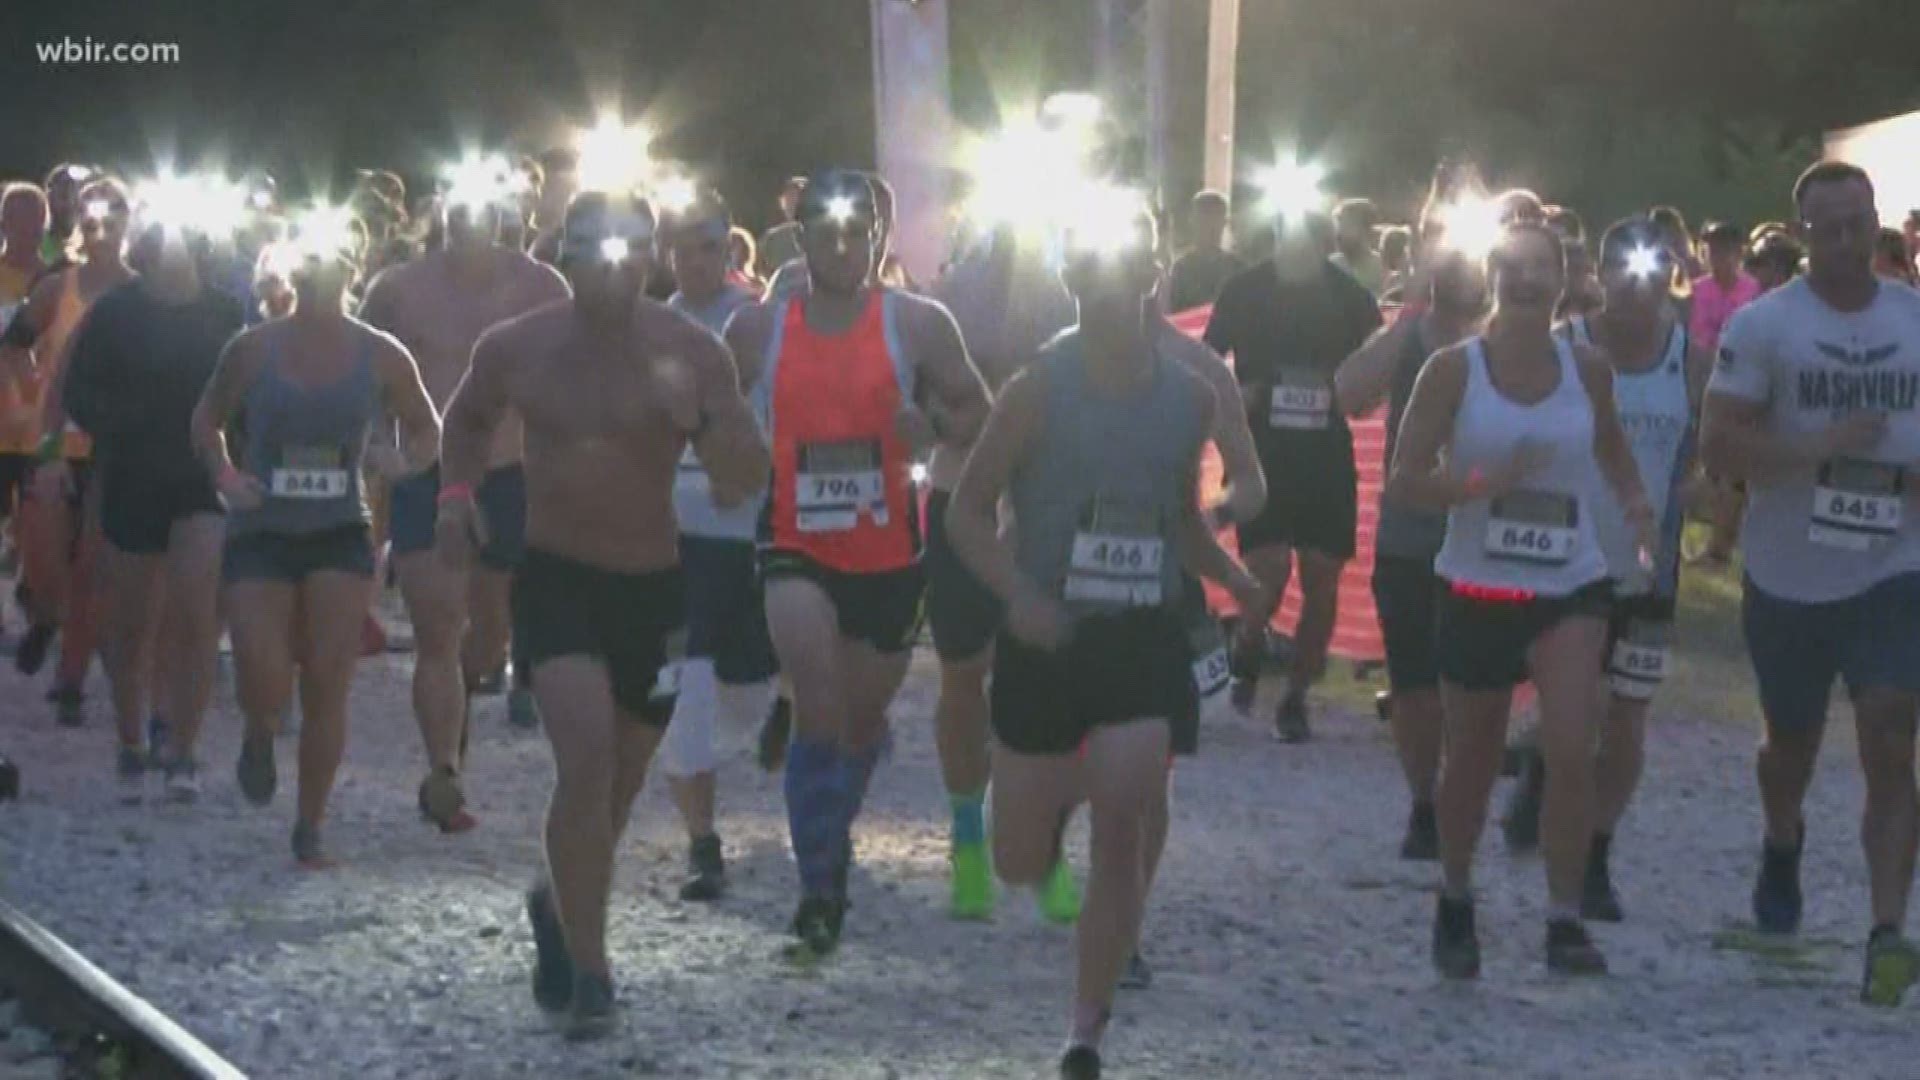 A 5k in the moonlight helps keep the temperatures cool, but gives you a chance to have some fun afterward.